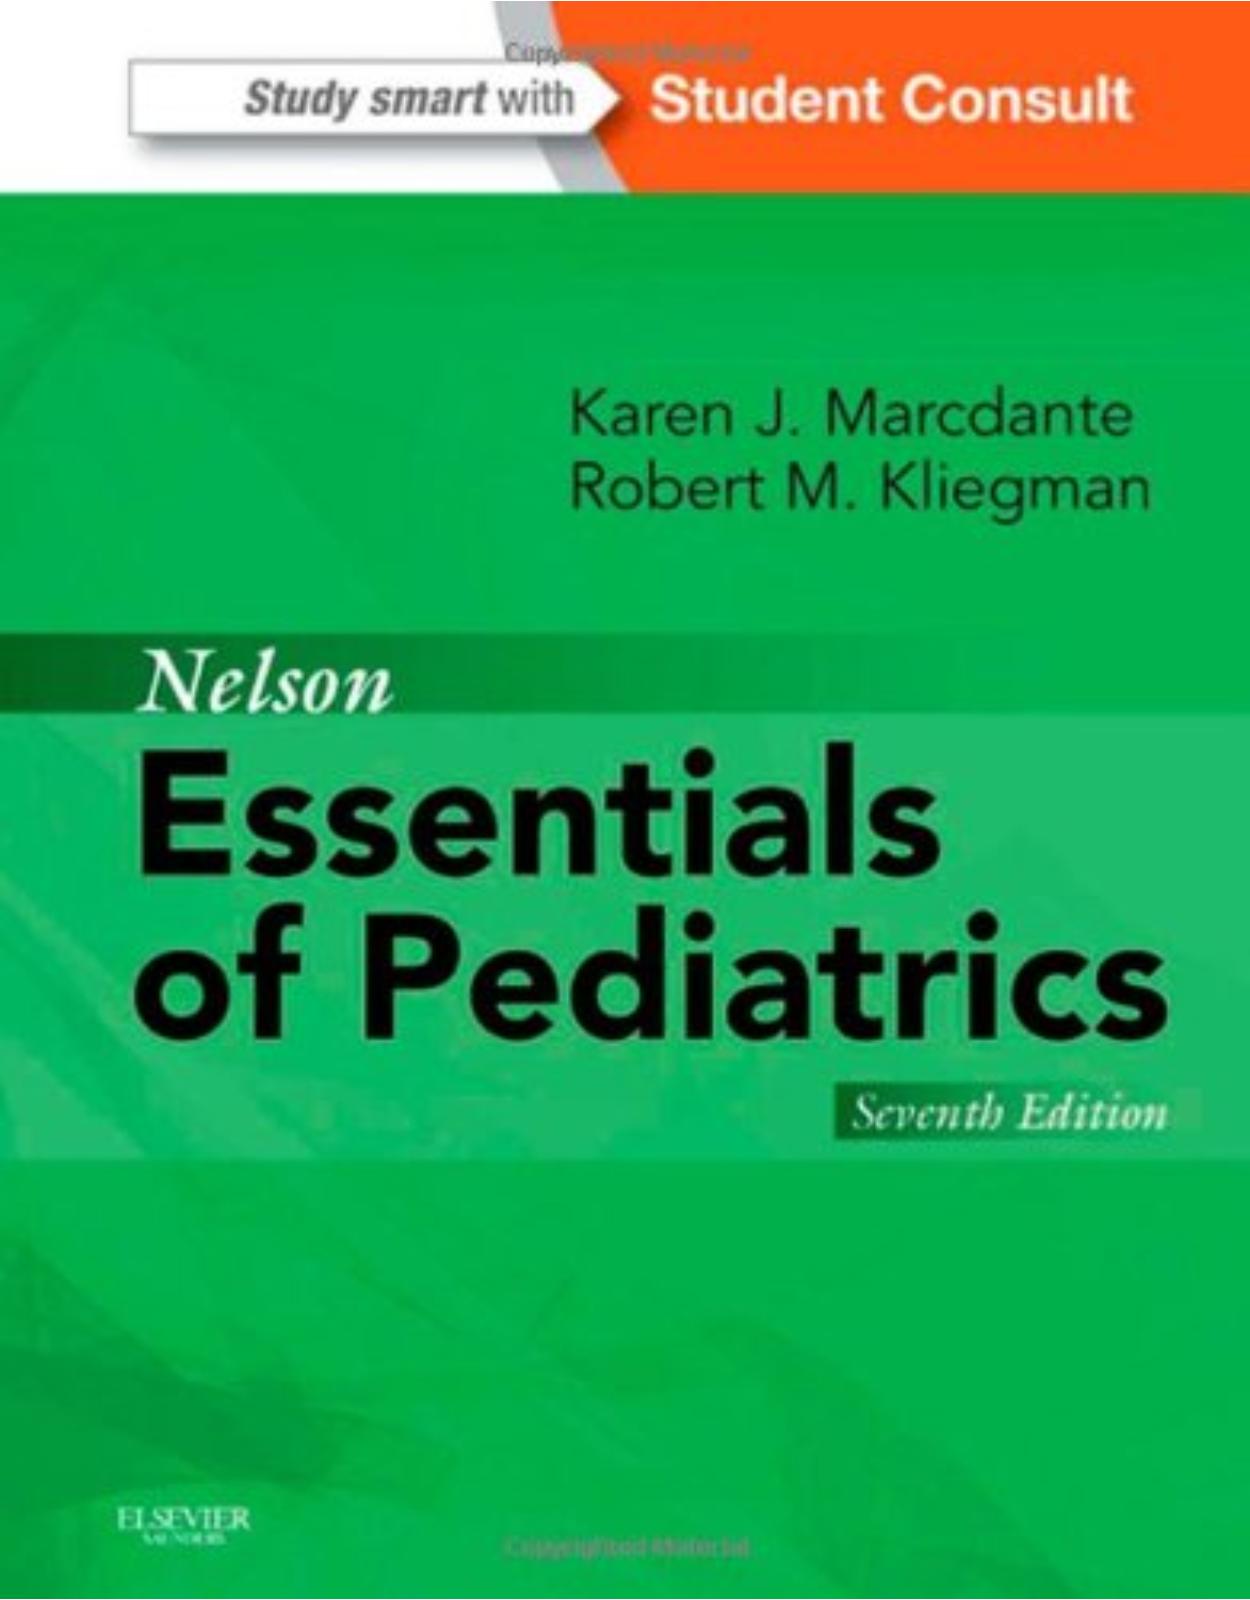 Nelson Essentials of Pediatrics: With STUDENT CONSULT Online Access, 7e